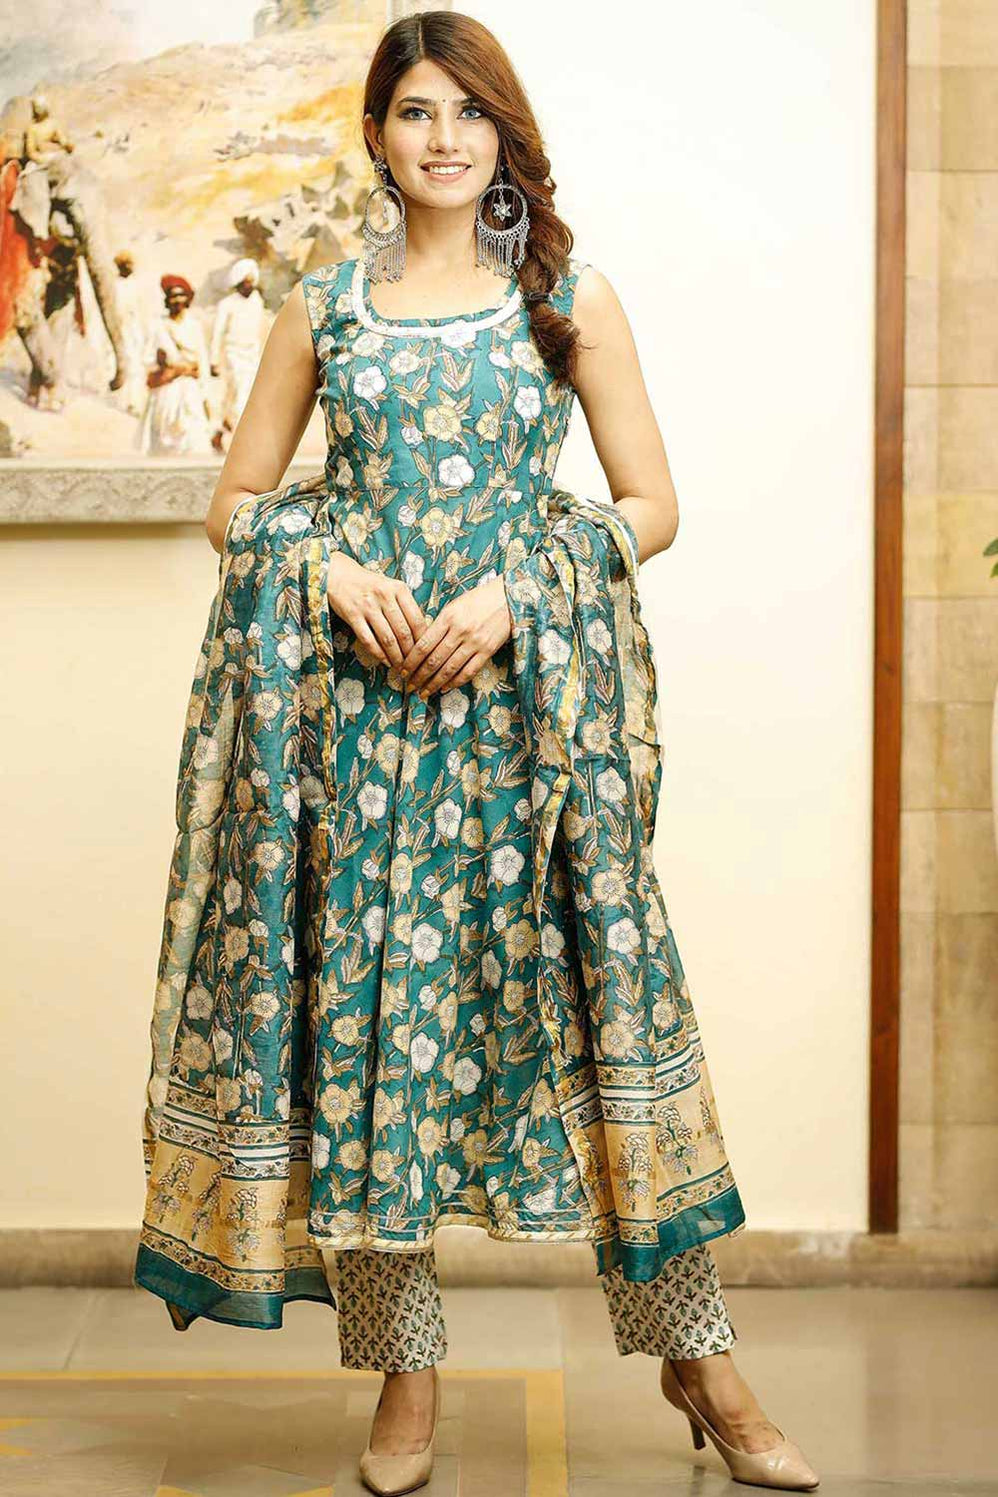 Shop Online for Kurtis, Sarees, Lehengas, Jewelry and more from India ...